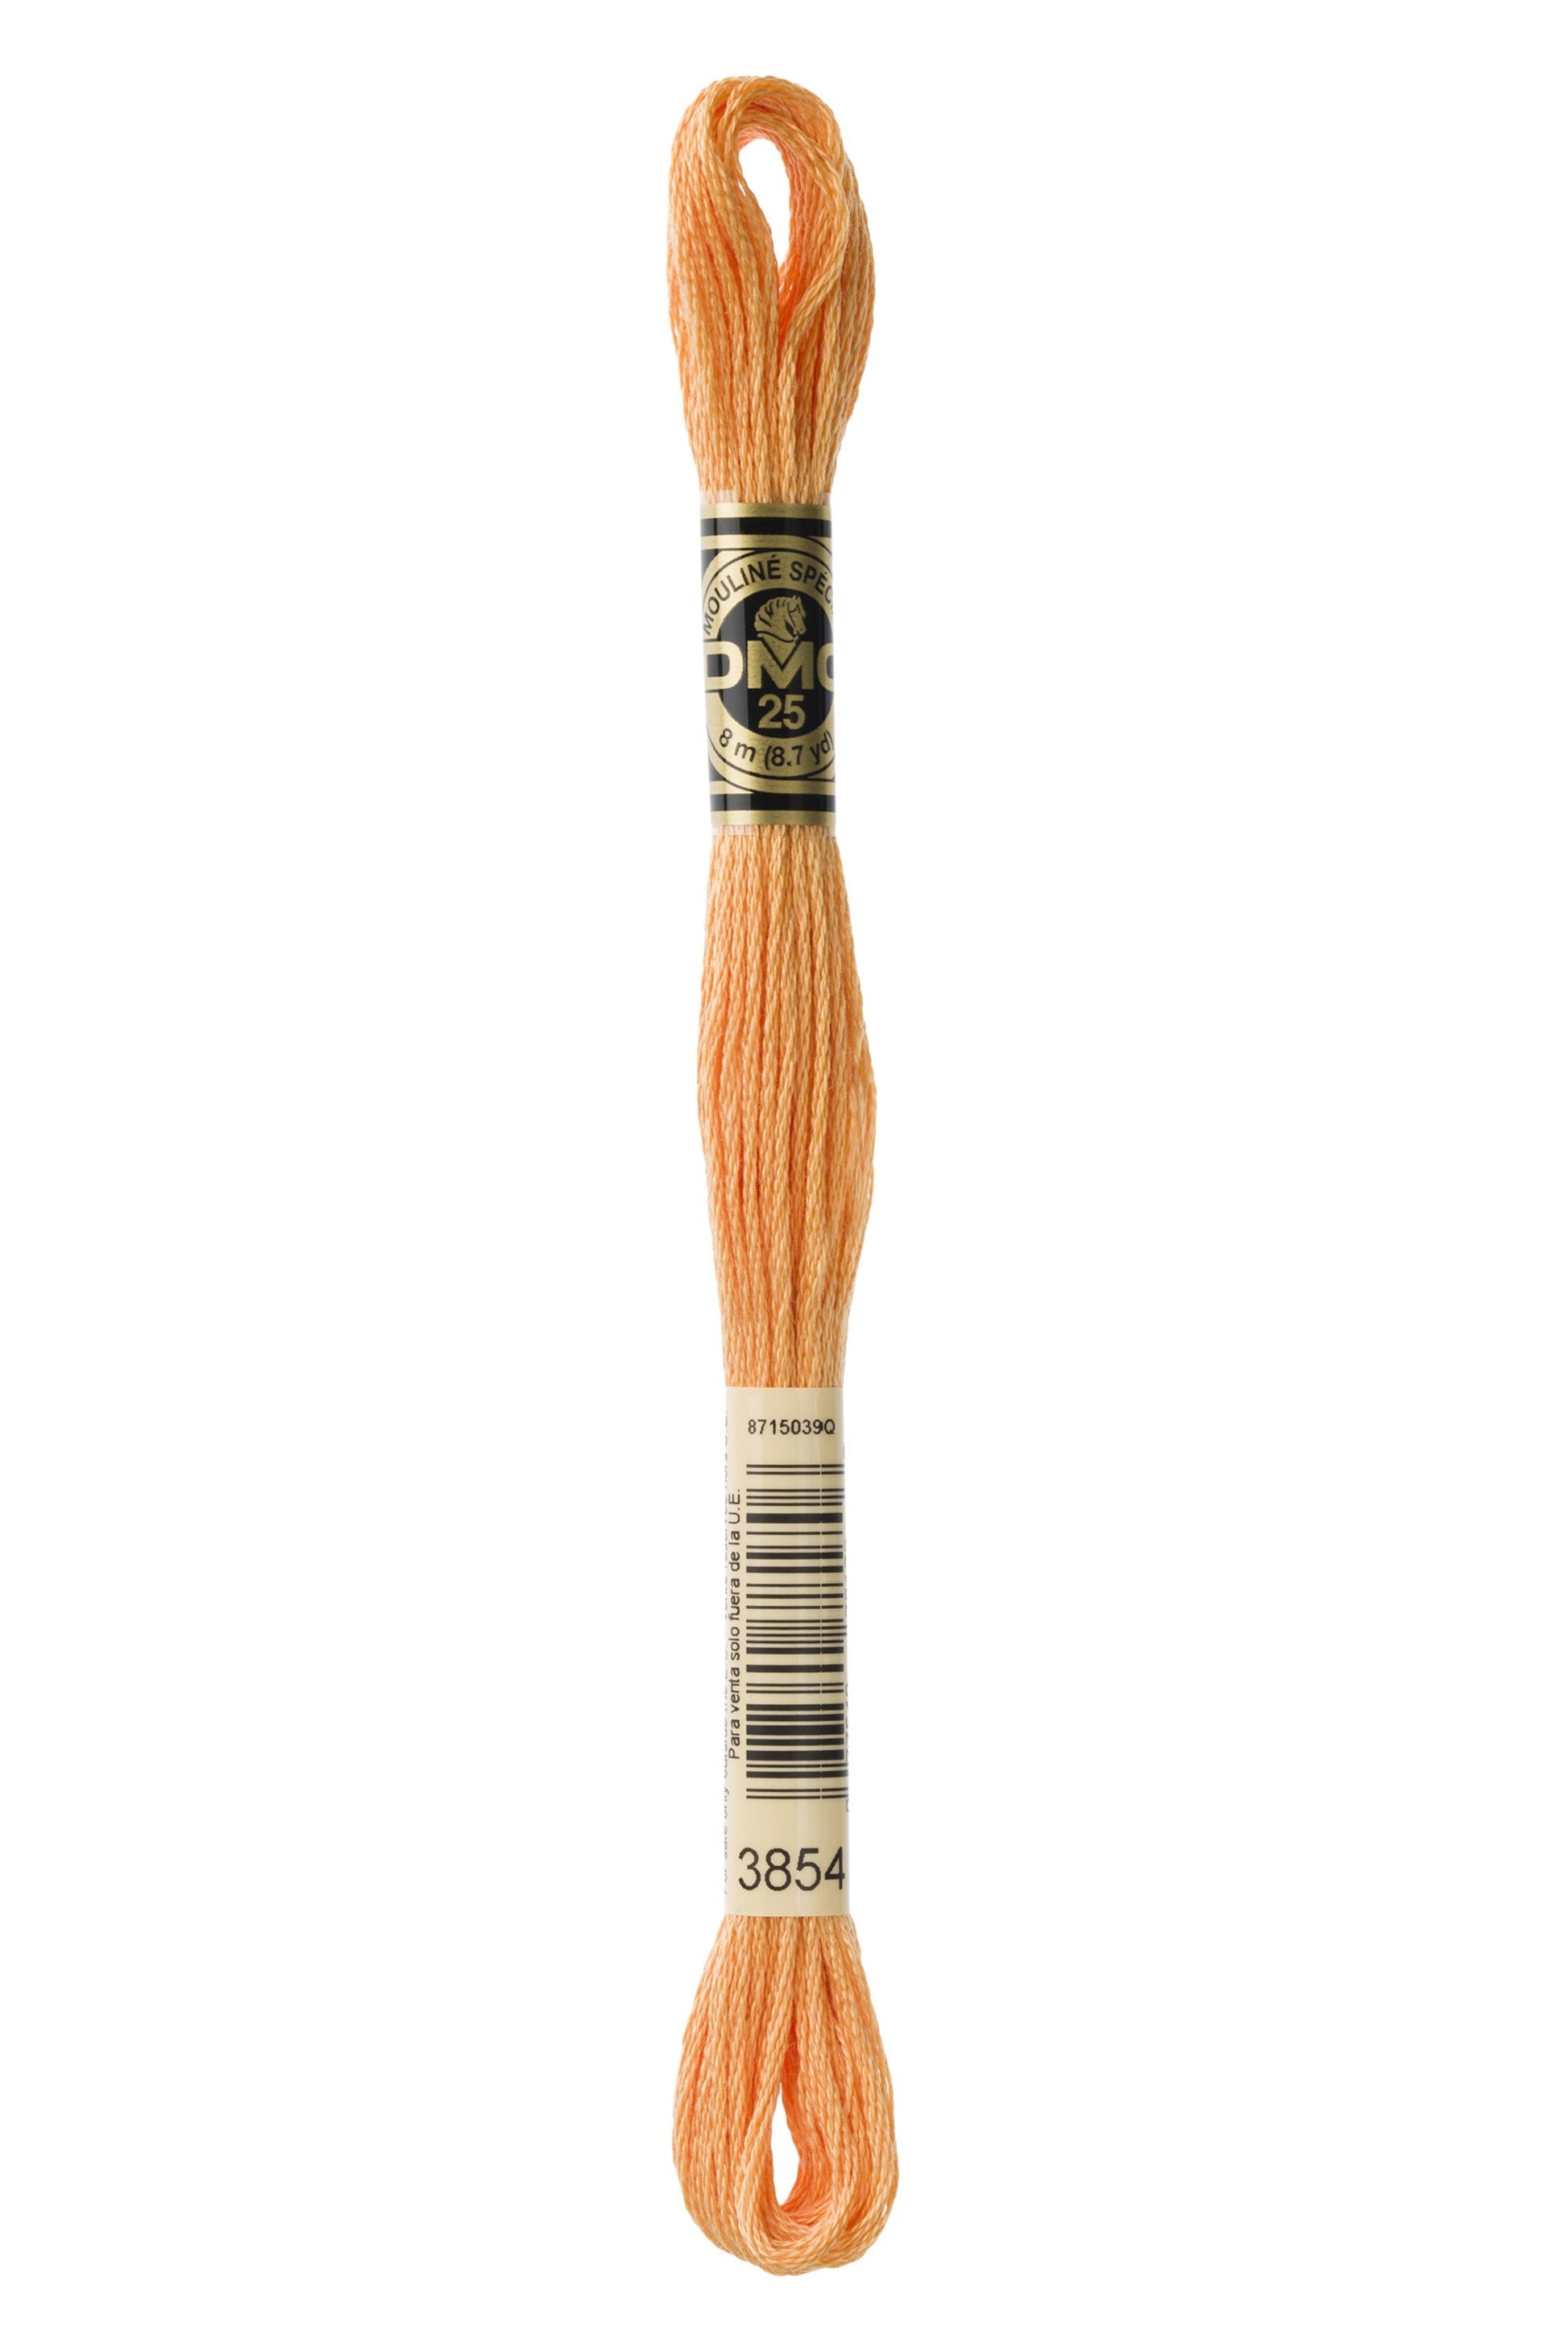 Six-Strand Embroidery Floss - 3854 (Chai Spice)-Embroidery Thread-Wild and Woolly Yarns